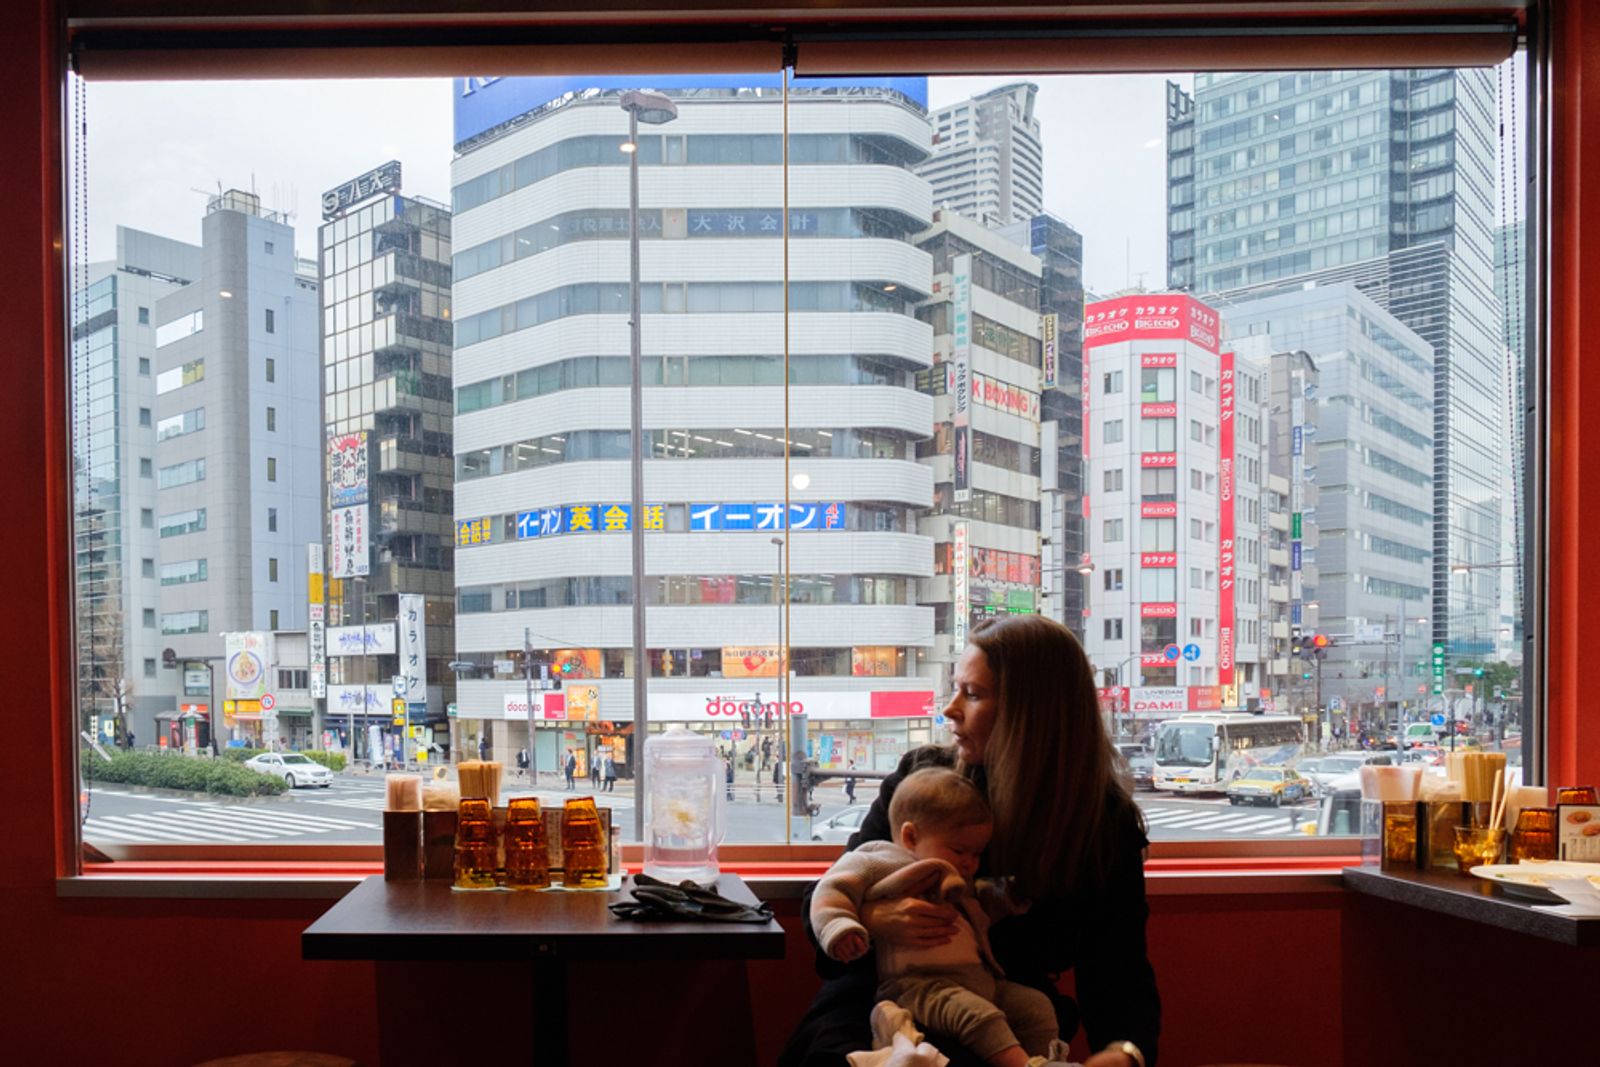 © Vincent Dupont-Blackshaw - Lunch with a view: A traveller takes a break with her baby in a noodle fast food restaurant. (Tokyo, Japan)